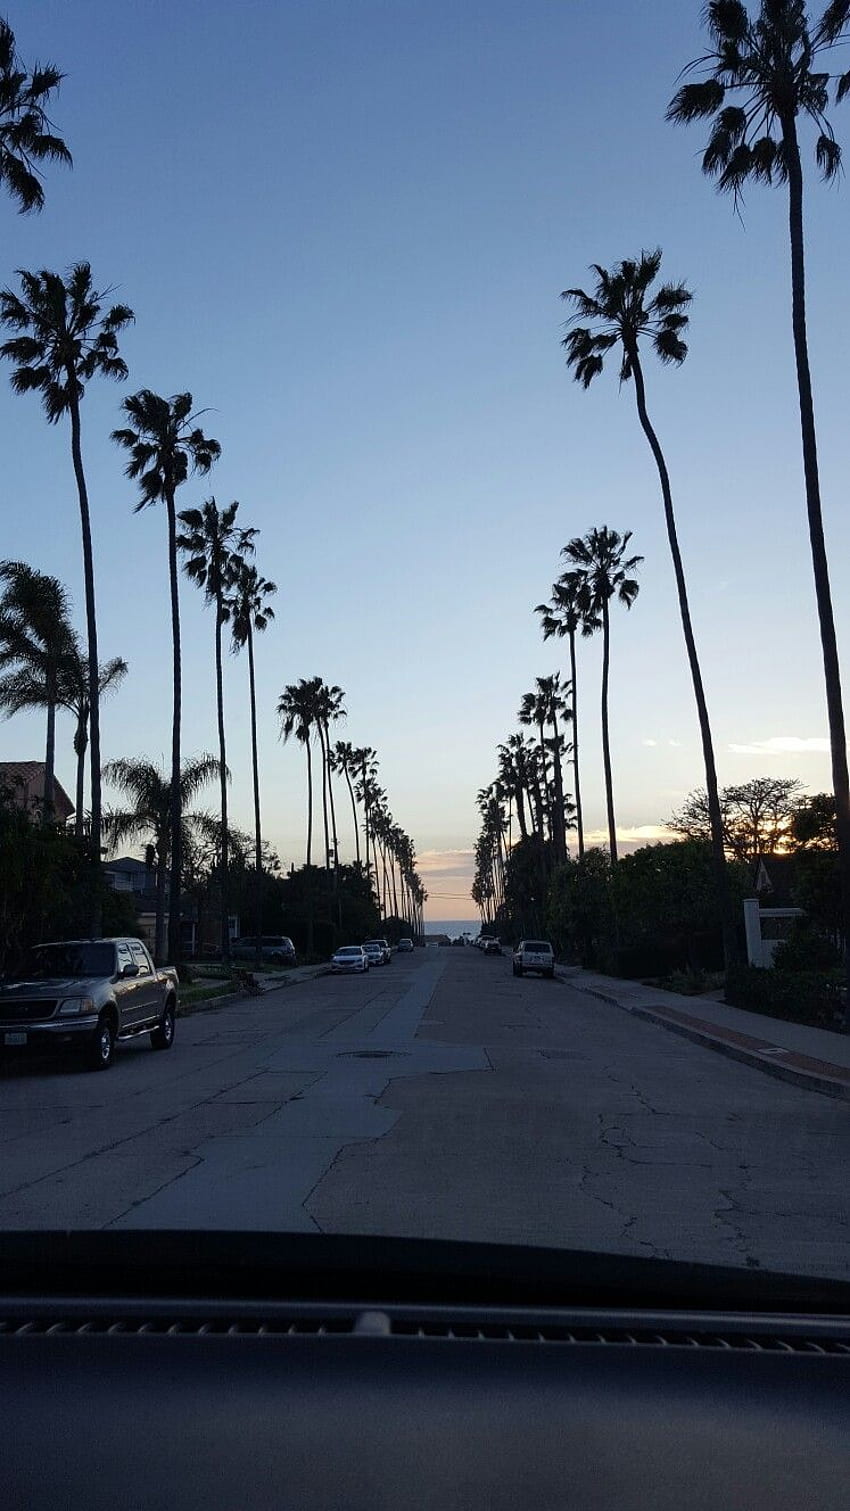 1290x2796px, 2K Free download | Tree Lined Street In San Diego, CA ...